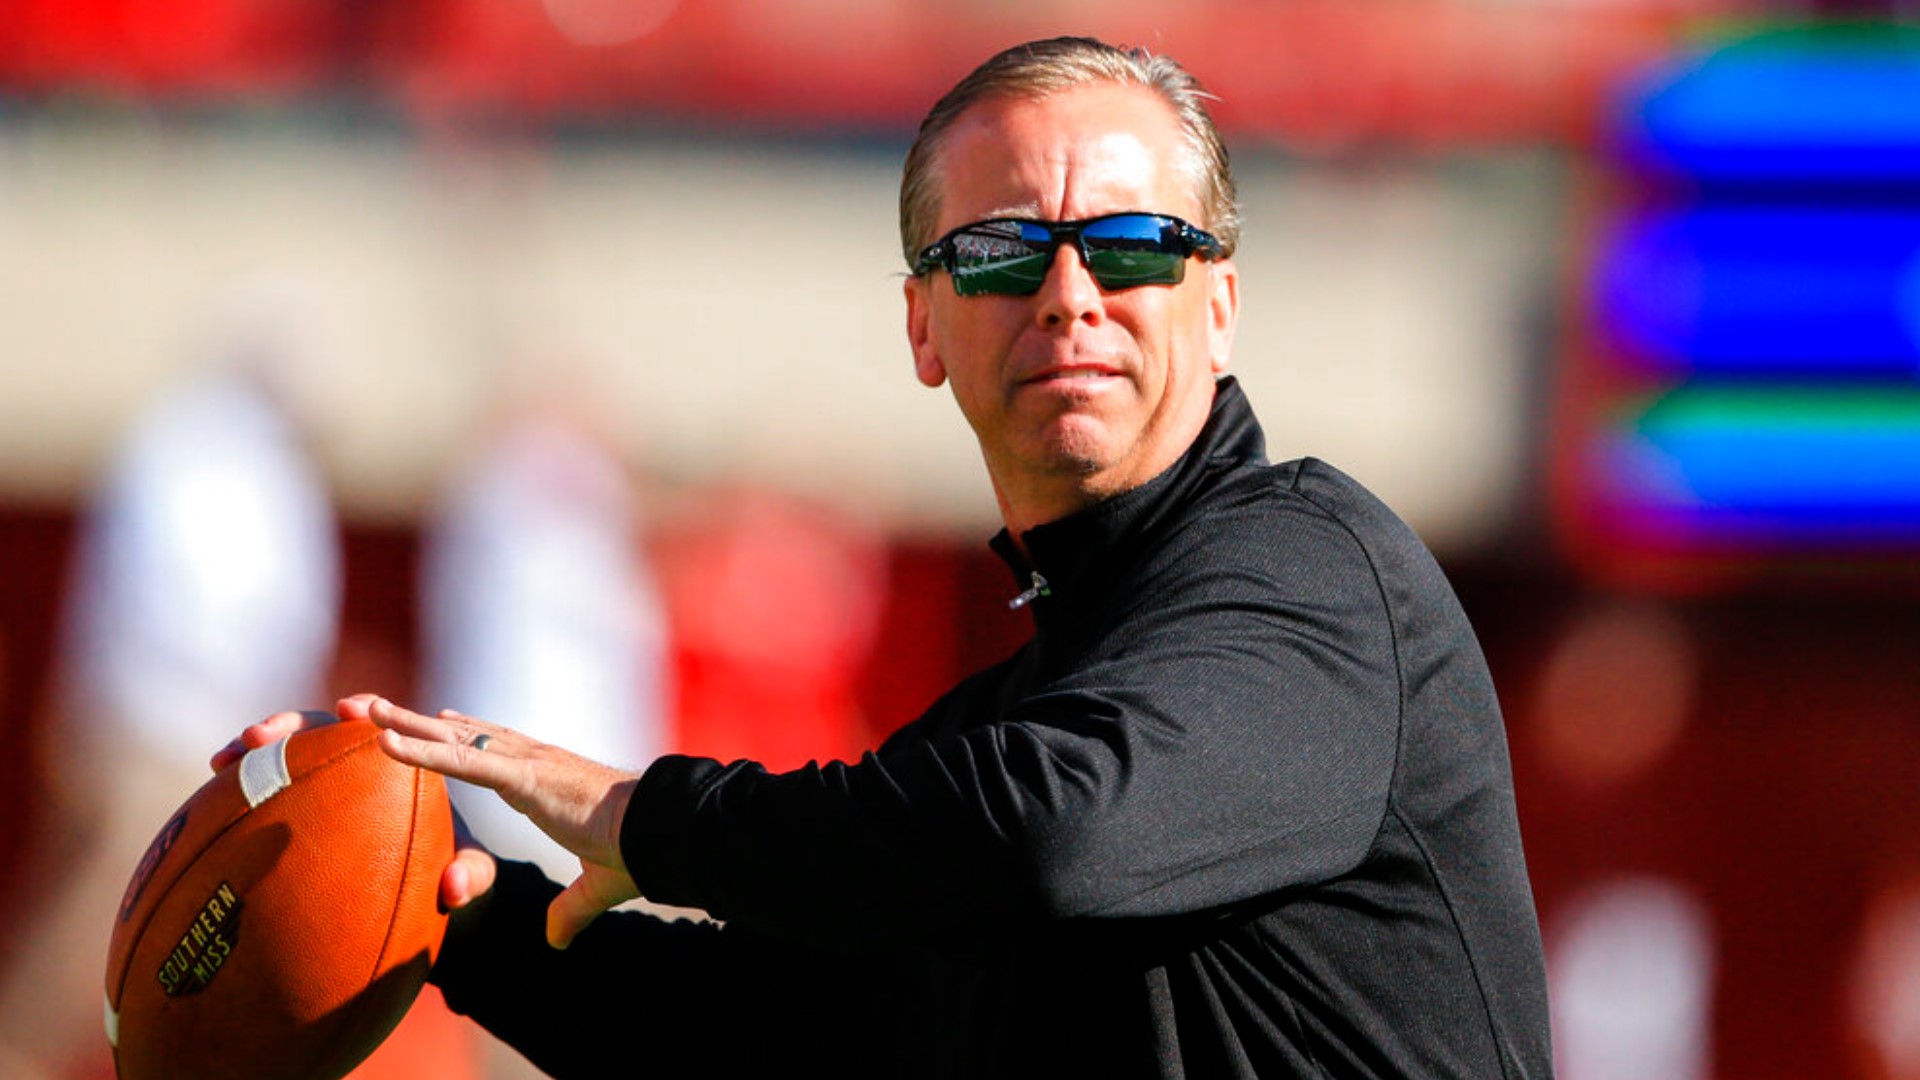 The Bulldogs have always been known for their run game and plethora of talented running backs. However, under offensive coordinator Todd Monken the team has evolved.